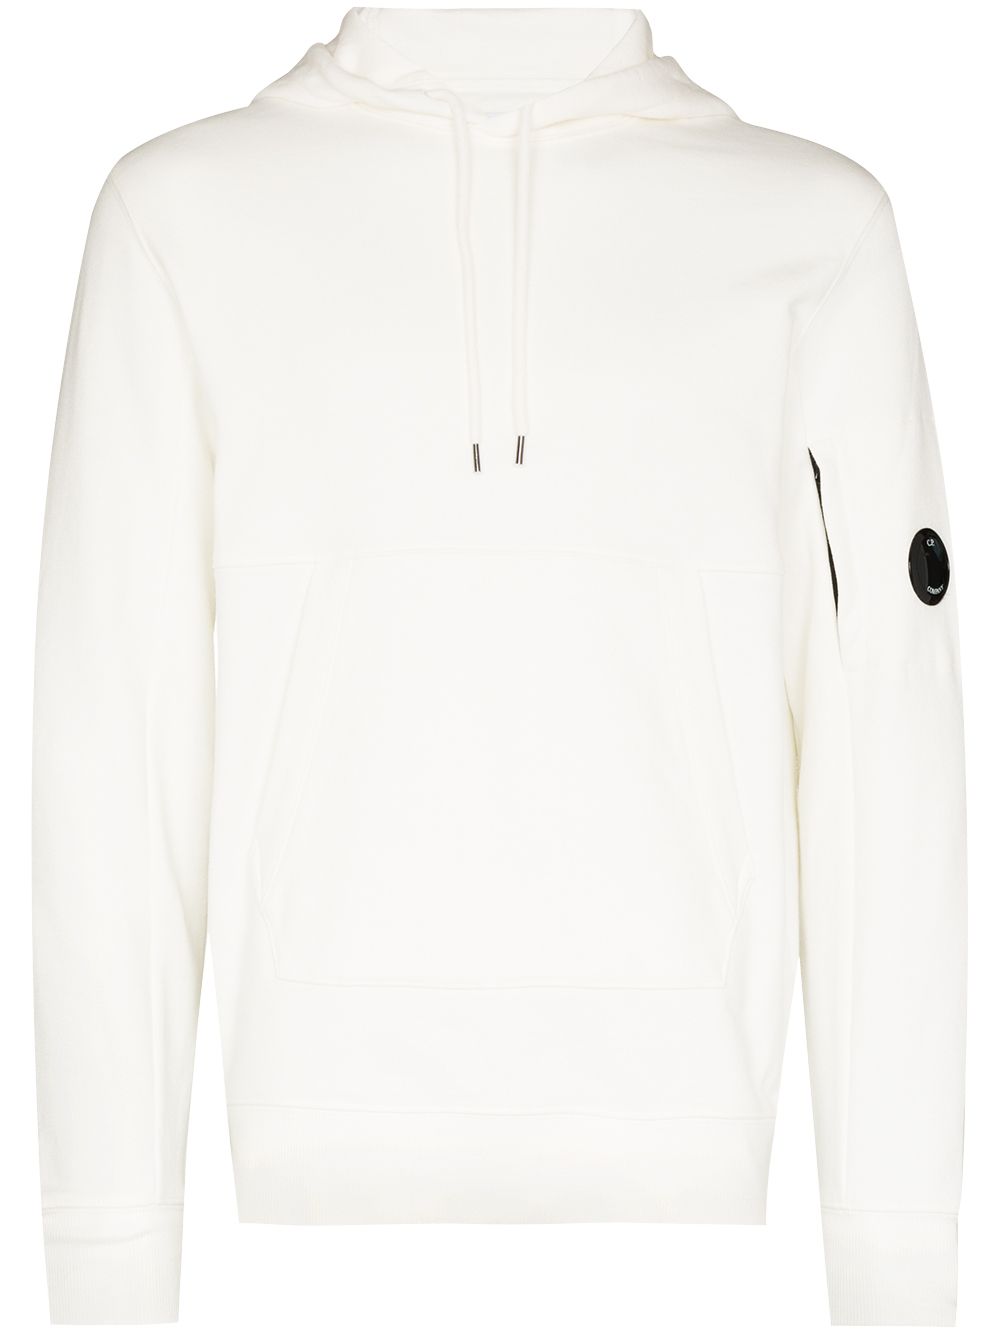 C.P. Company Logo Patch Drawstring Hoodie in White